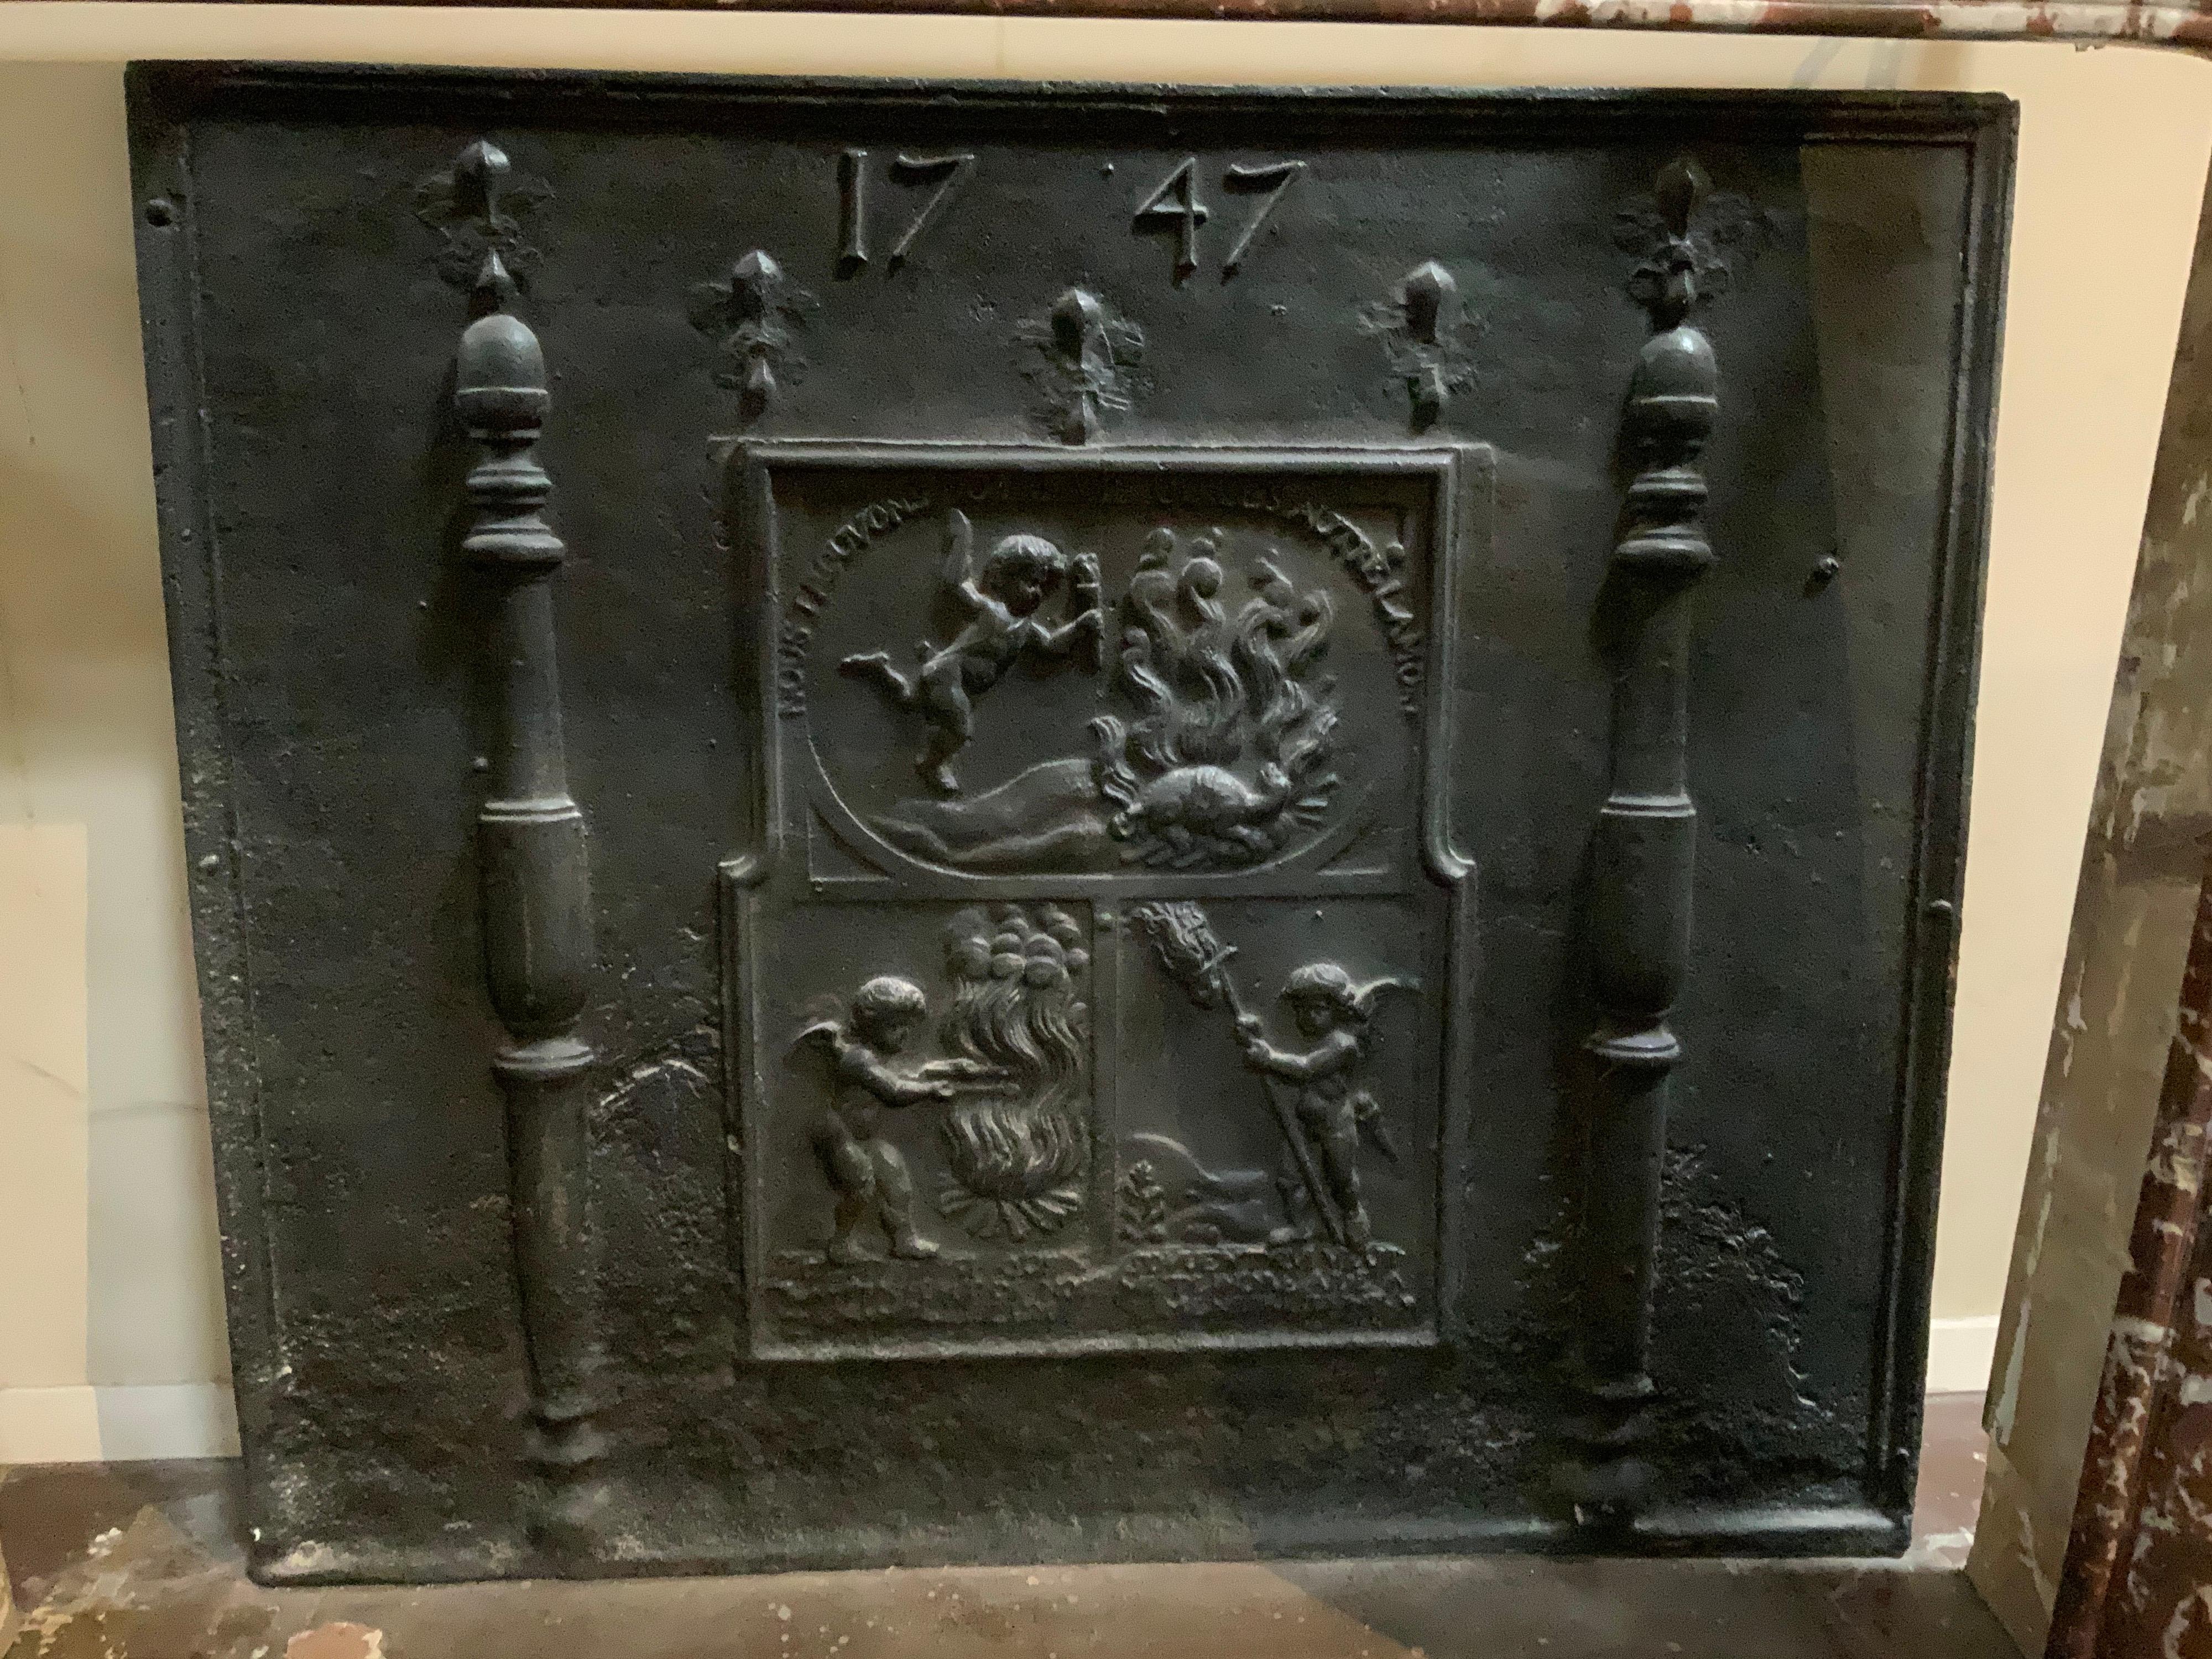 This cast iron fireback origins from France, 1747.